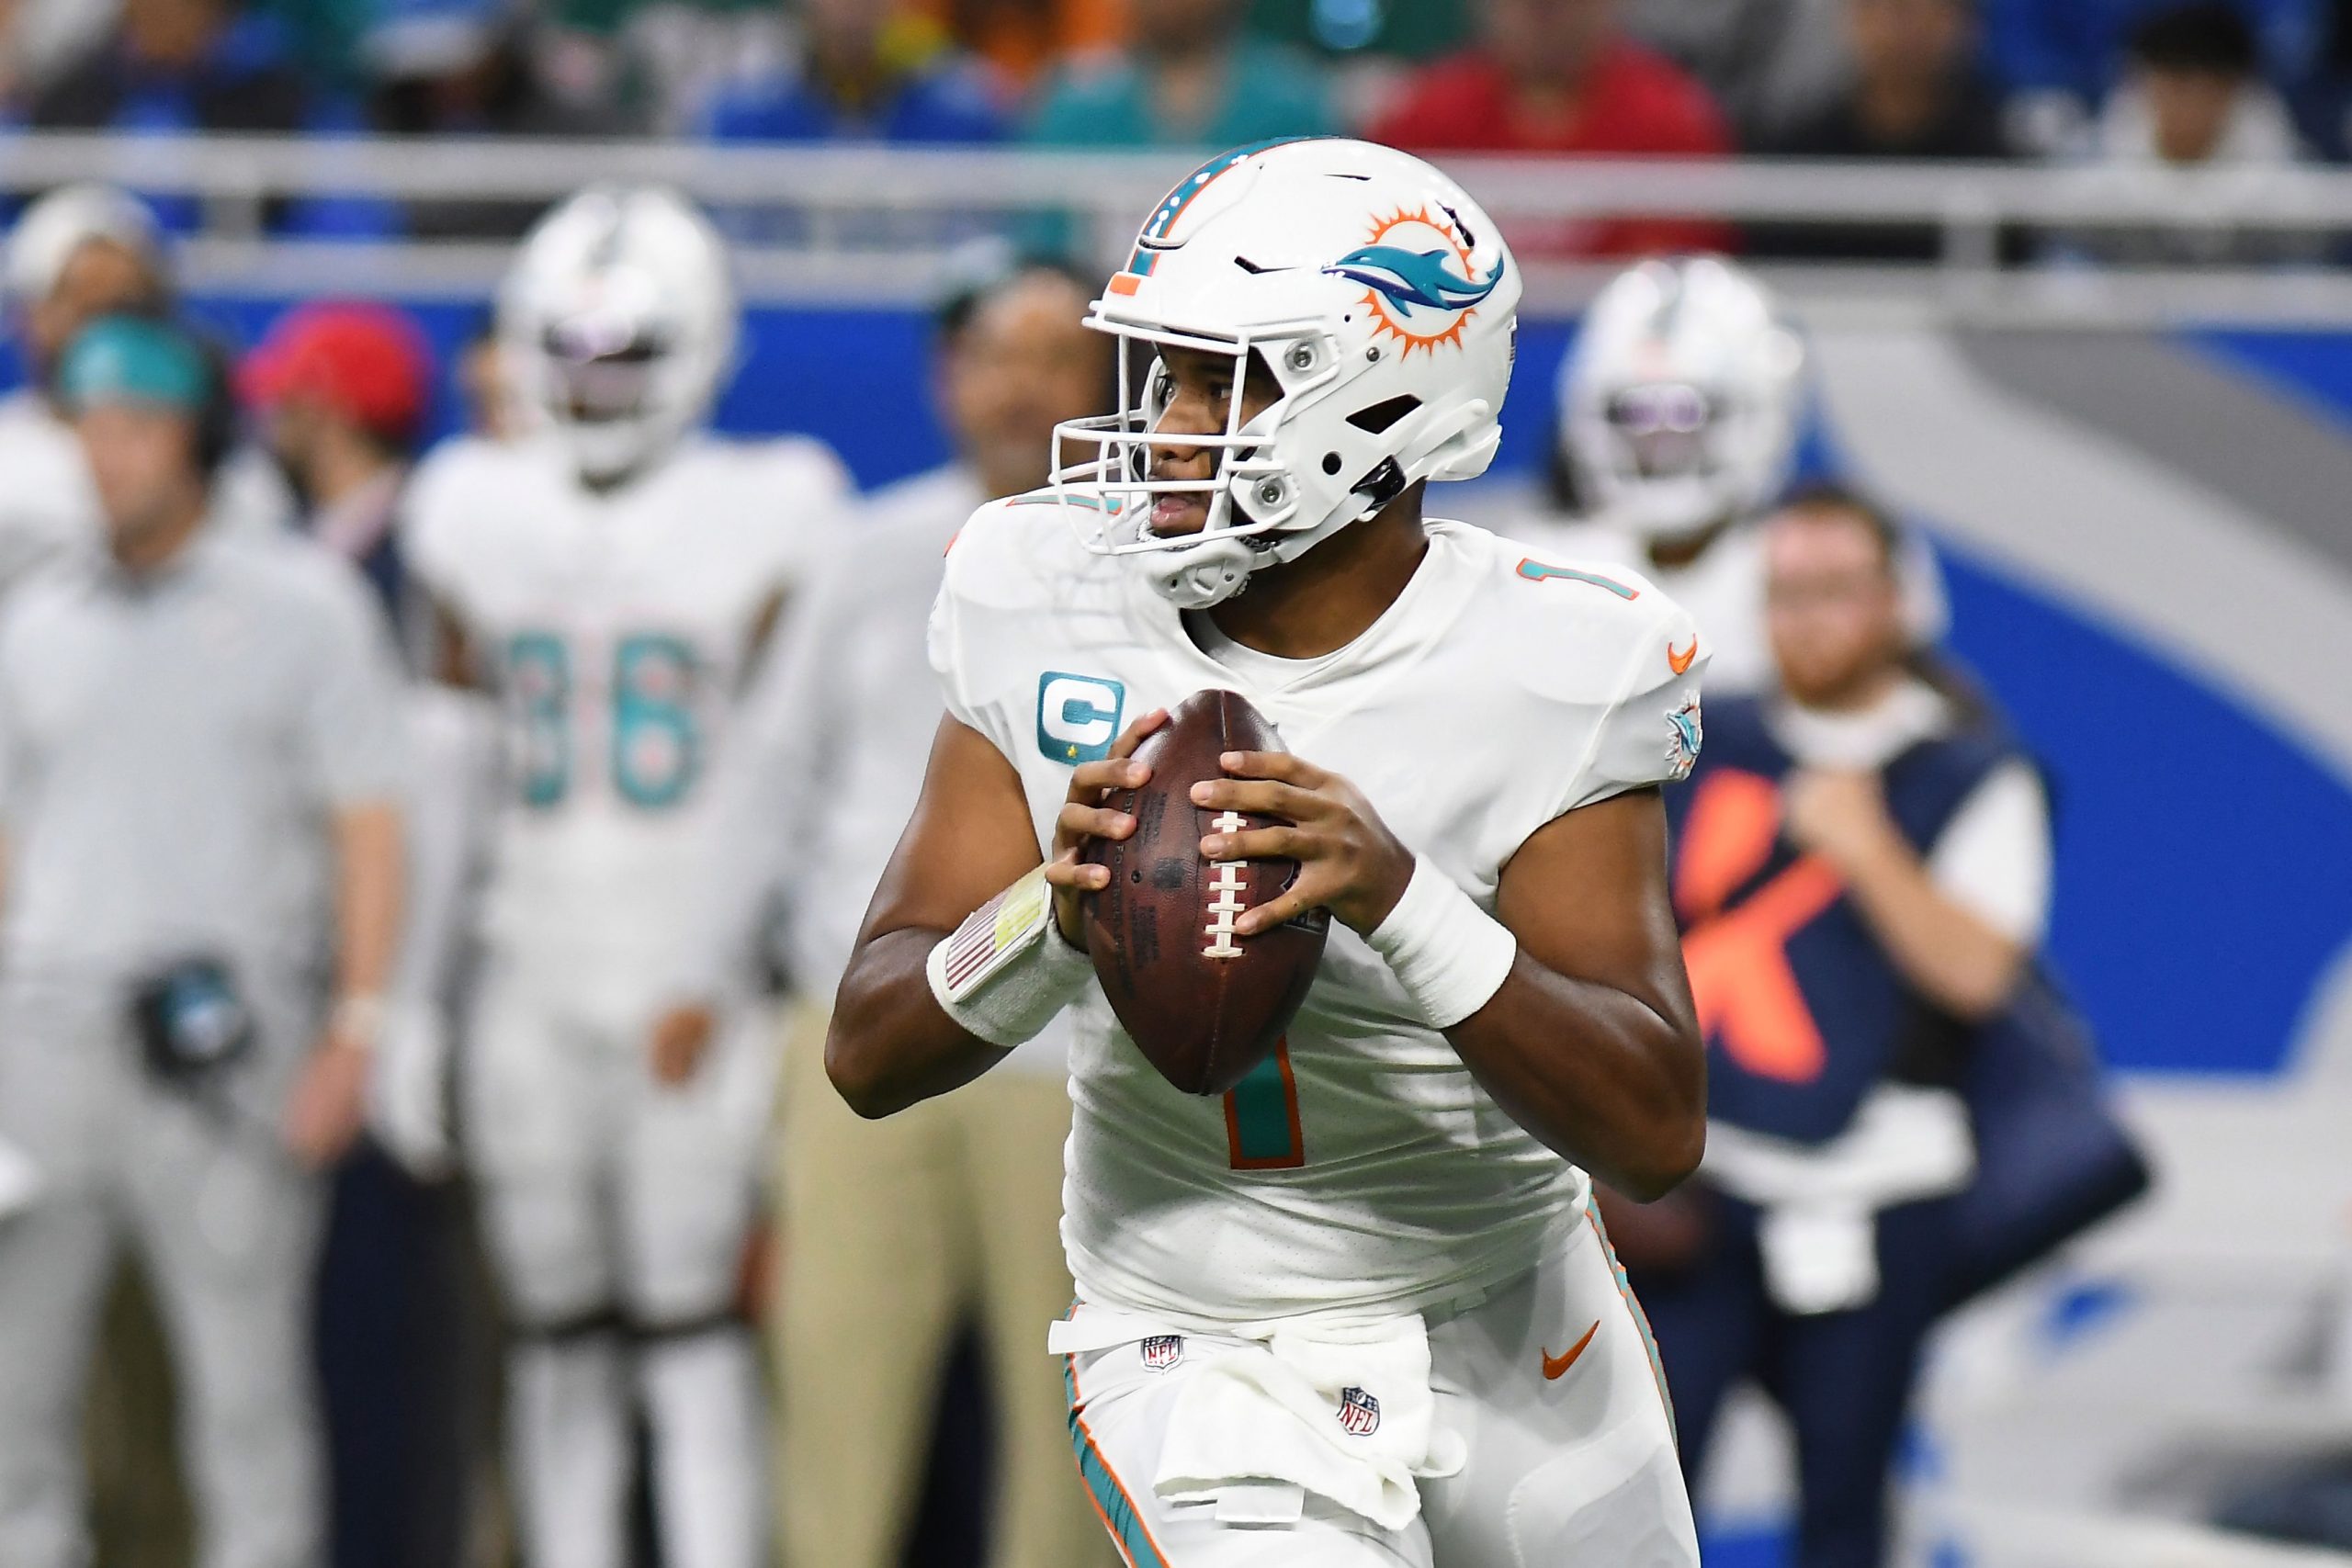 Miami Dolphins looking to build on 2022 performance, Tua Tagovailova likely to continue stint with outfit